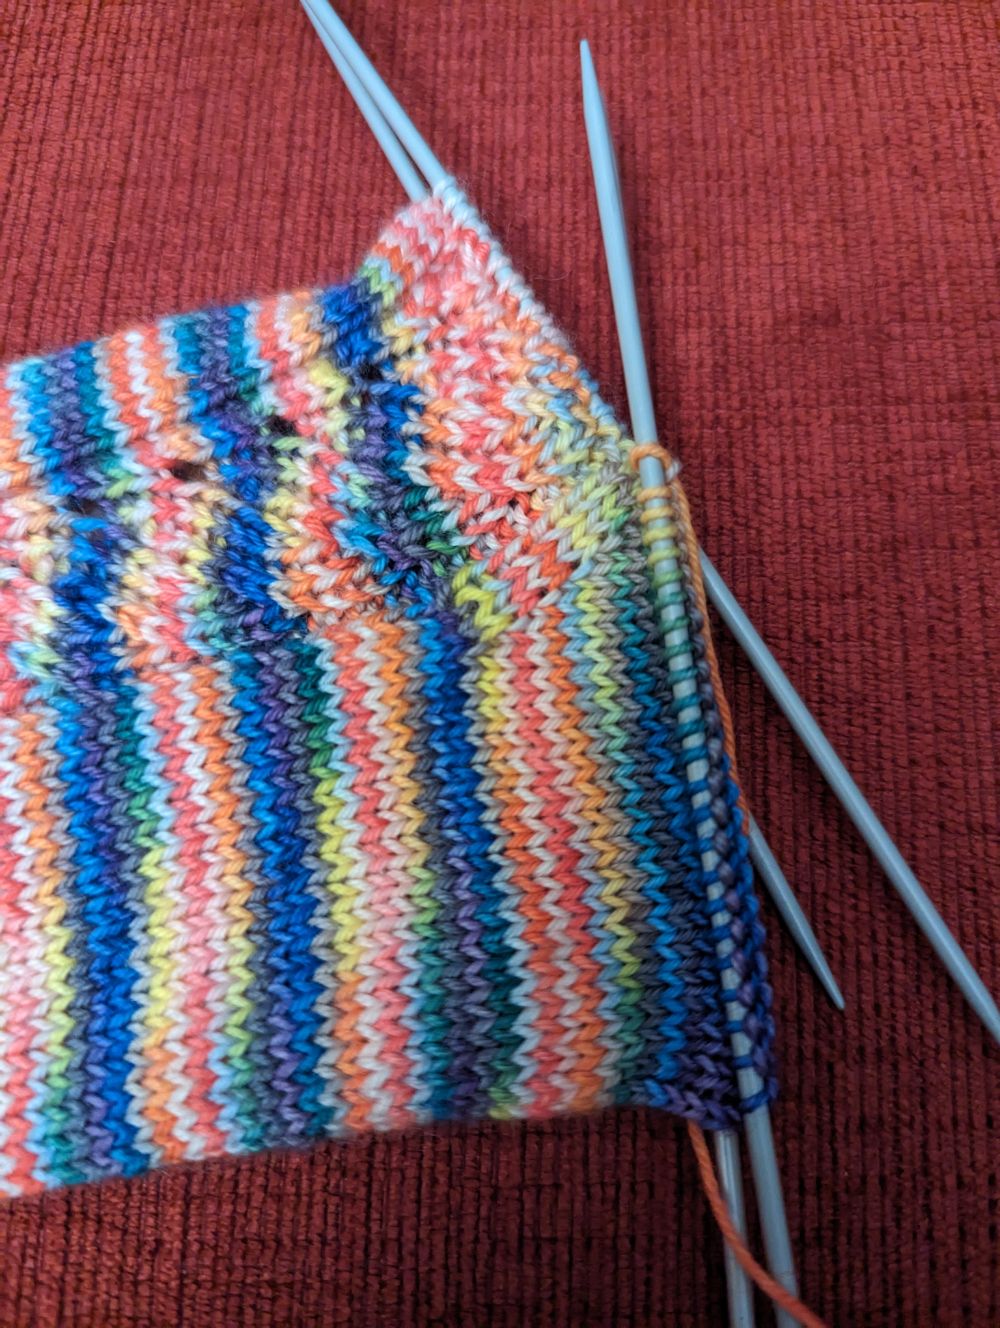 The in-progress gusset increases of a toe-up sock.